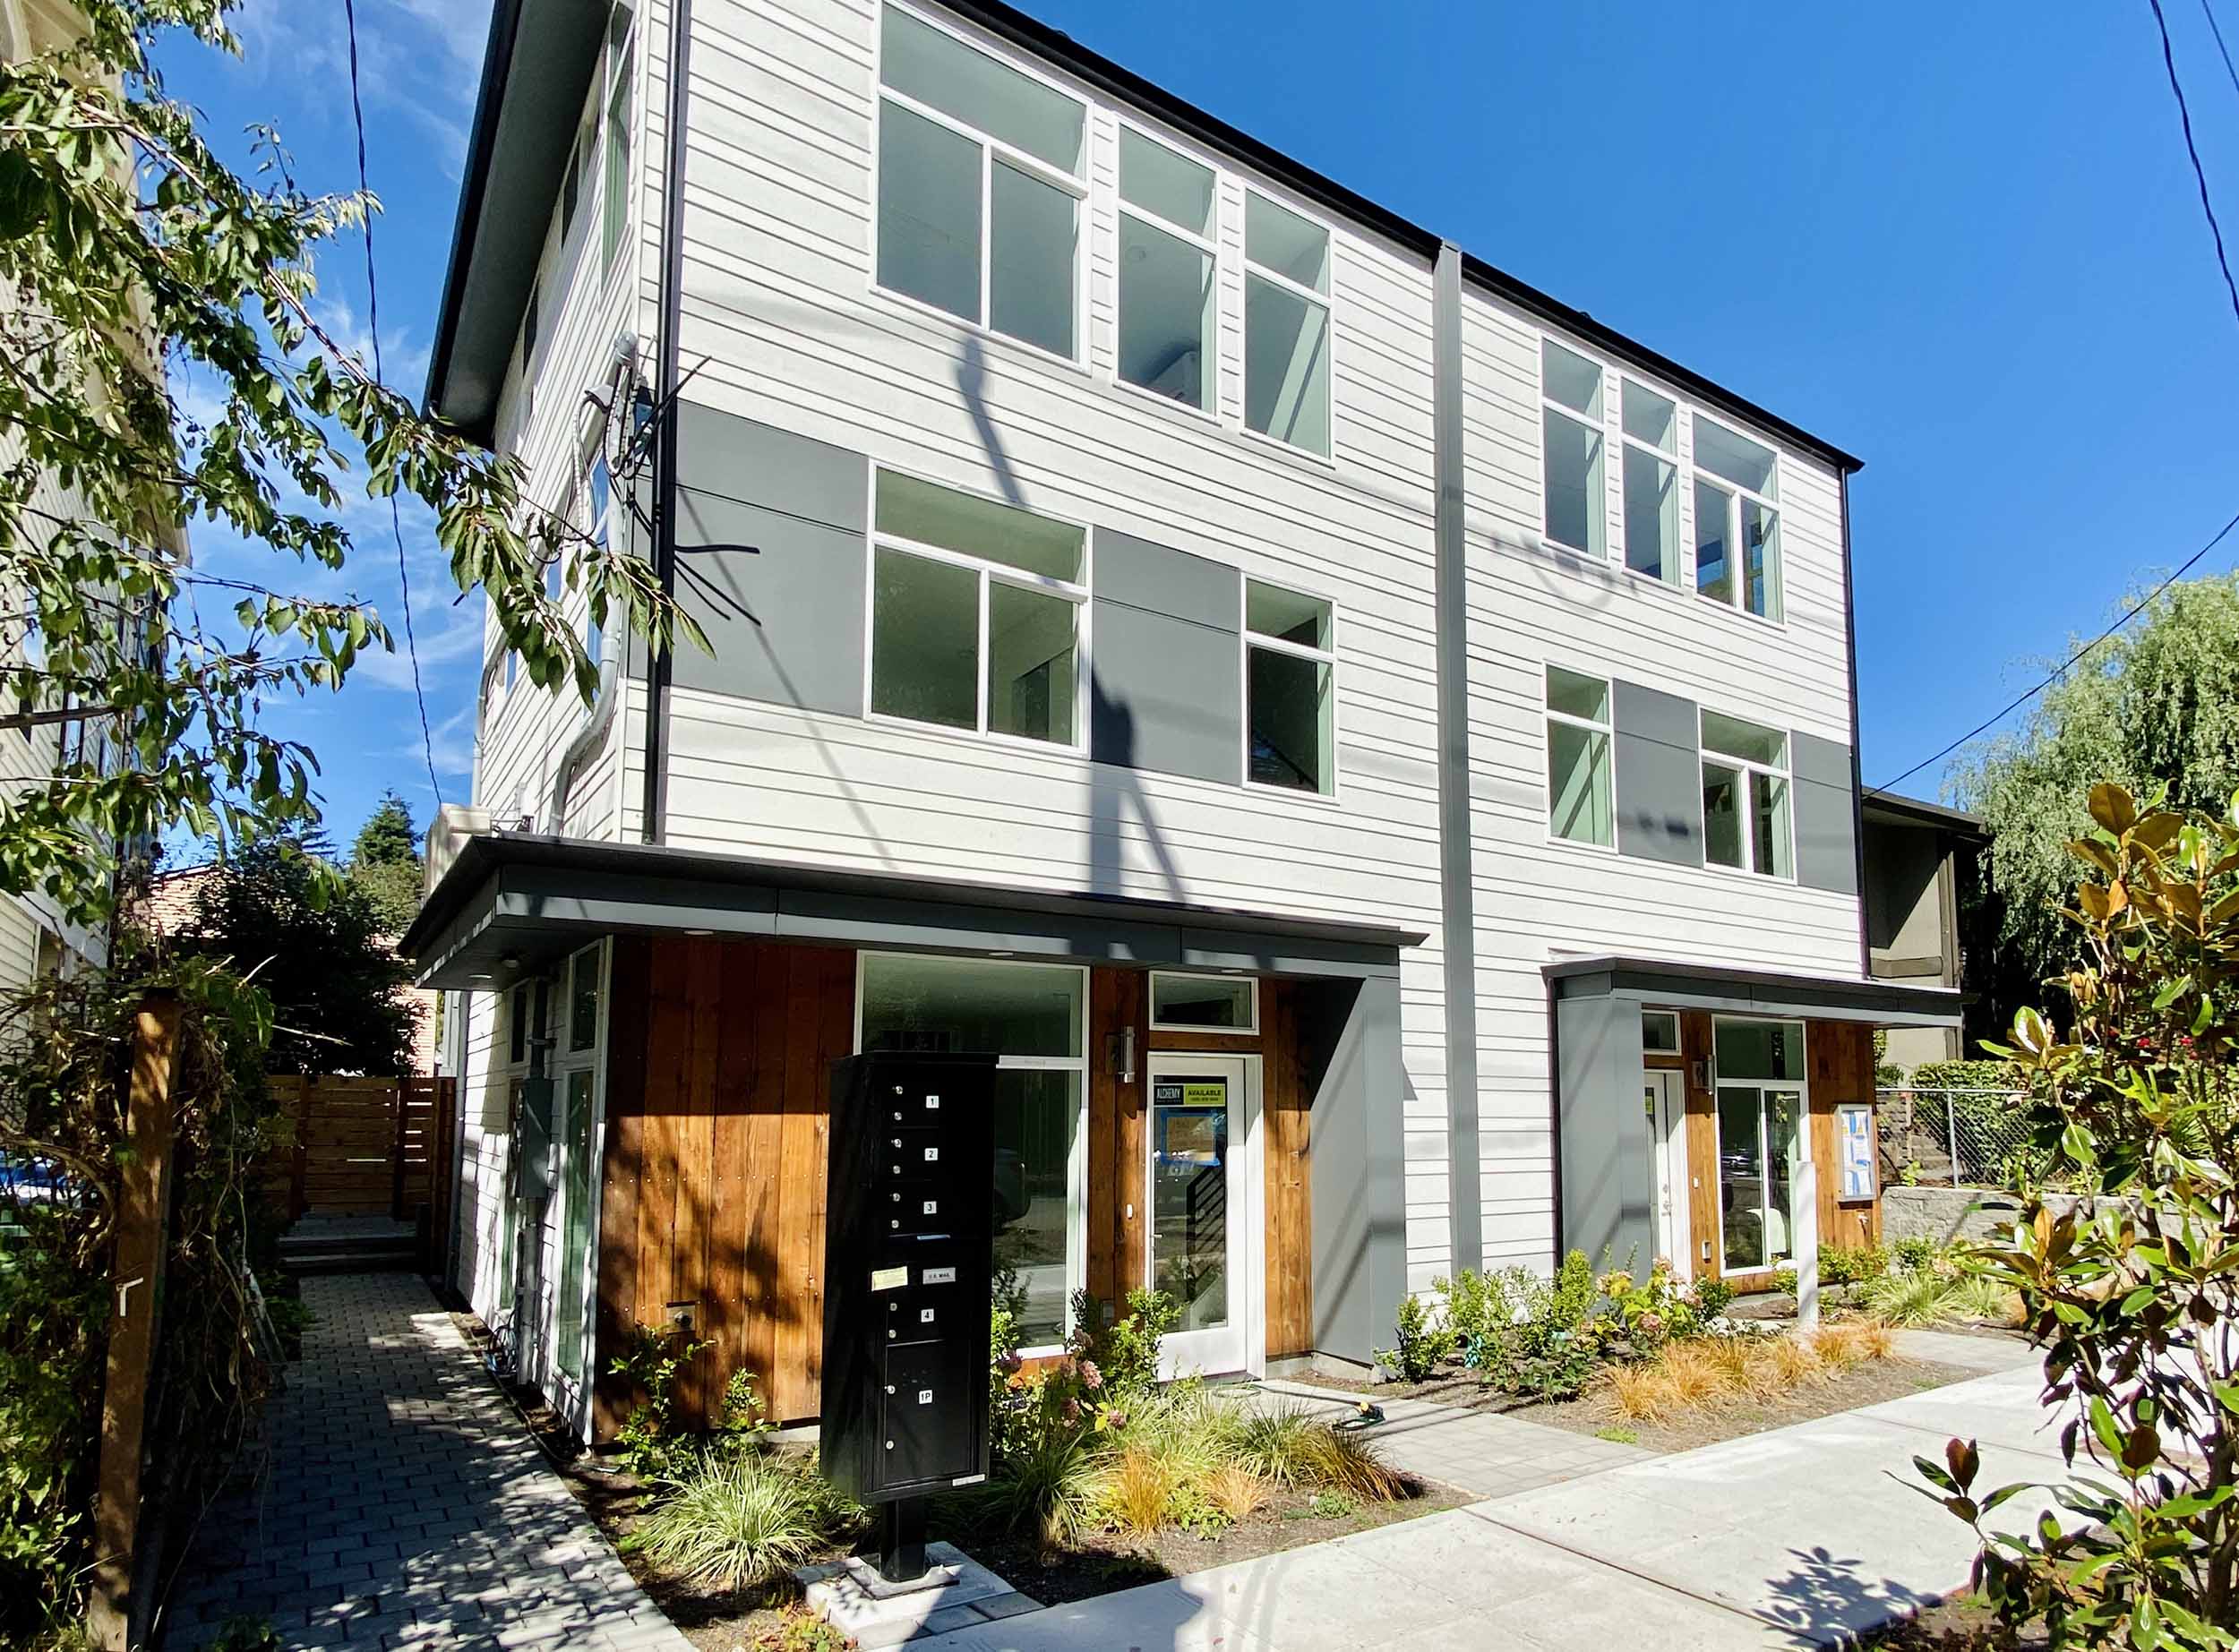 Unit 820 B Exterior of a Diana DADU floor-plan located at 820 S Rose Street Seattle, WA 98108